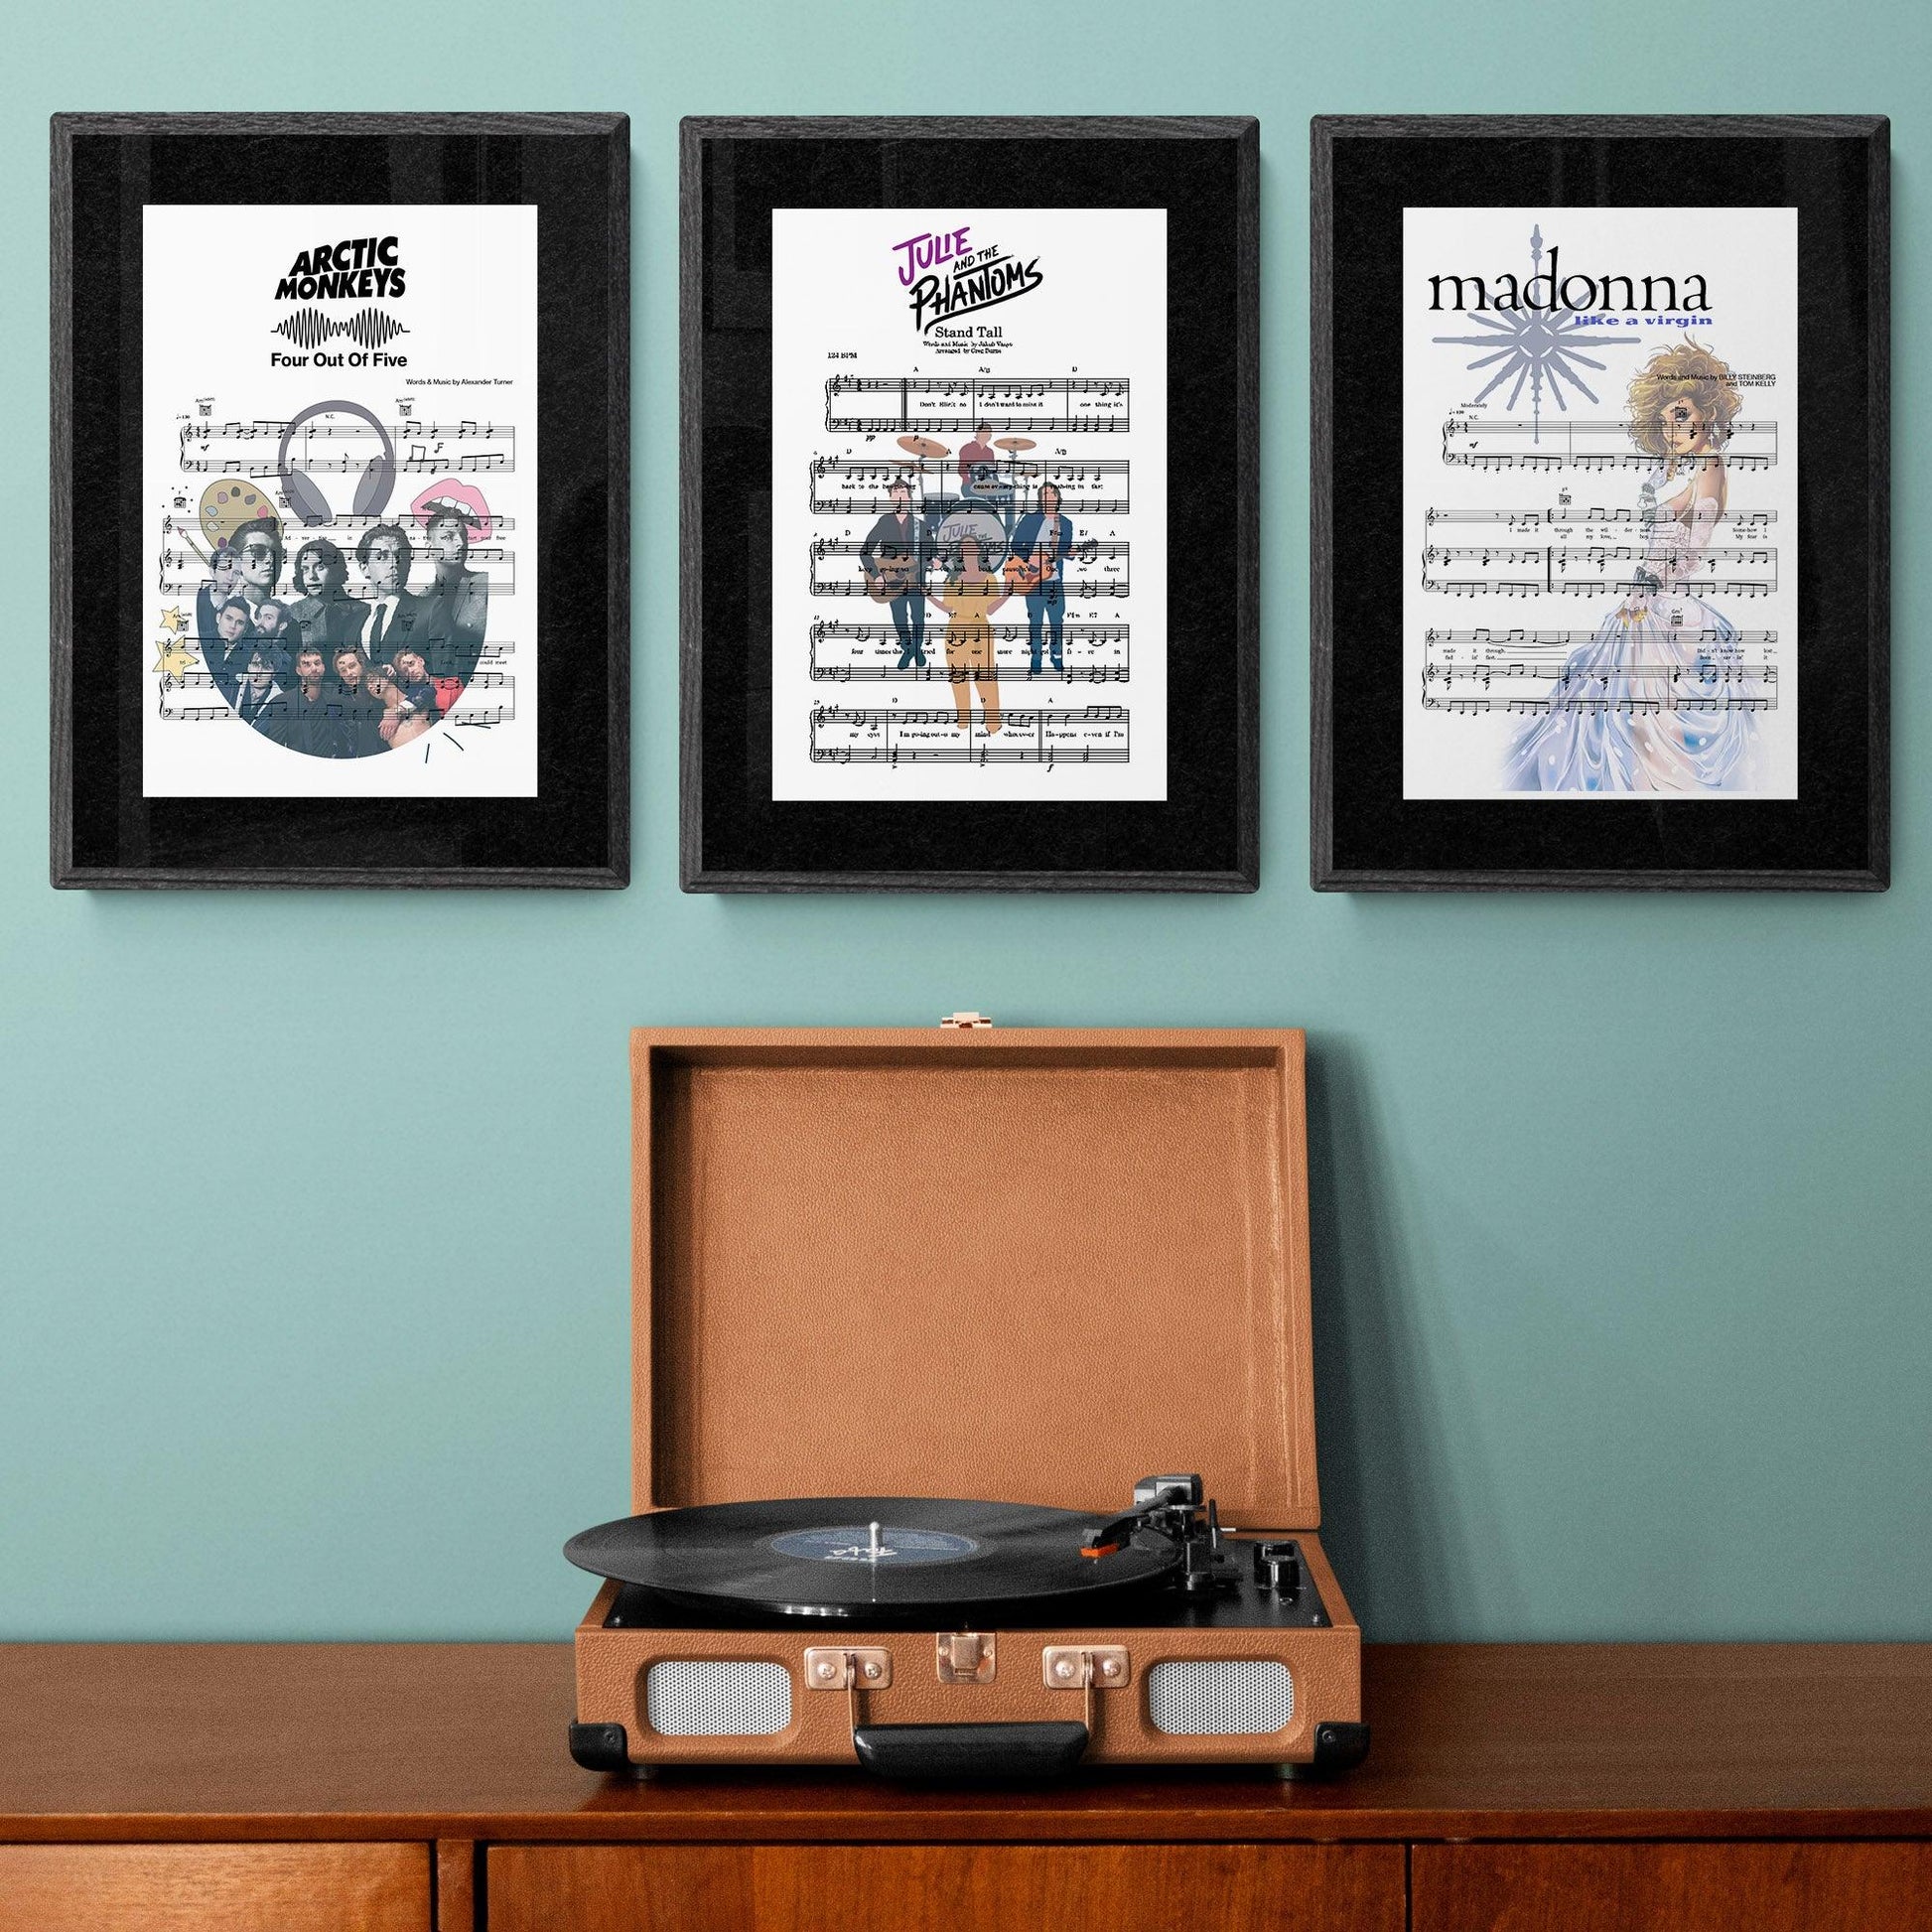 Julie and the Phantoms - Stand Tall Song Print | Song Music Sheet Notes Print  Everyone has a favorite song especially Madonna Don't Cry For Me Argentina Print, and now you can show the score as printed staff. The personal favorite song sheet print shows the song chosen as the score. 